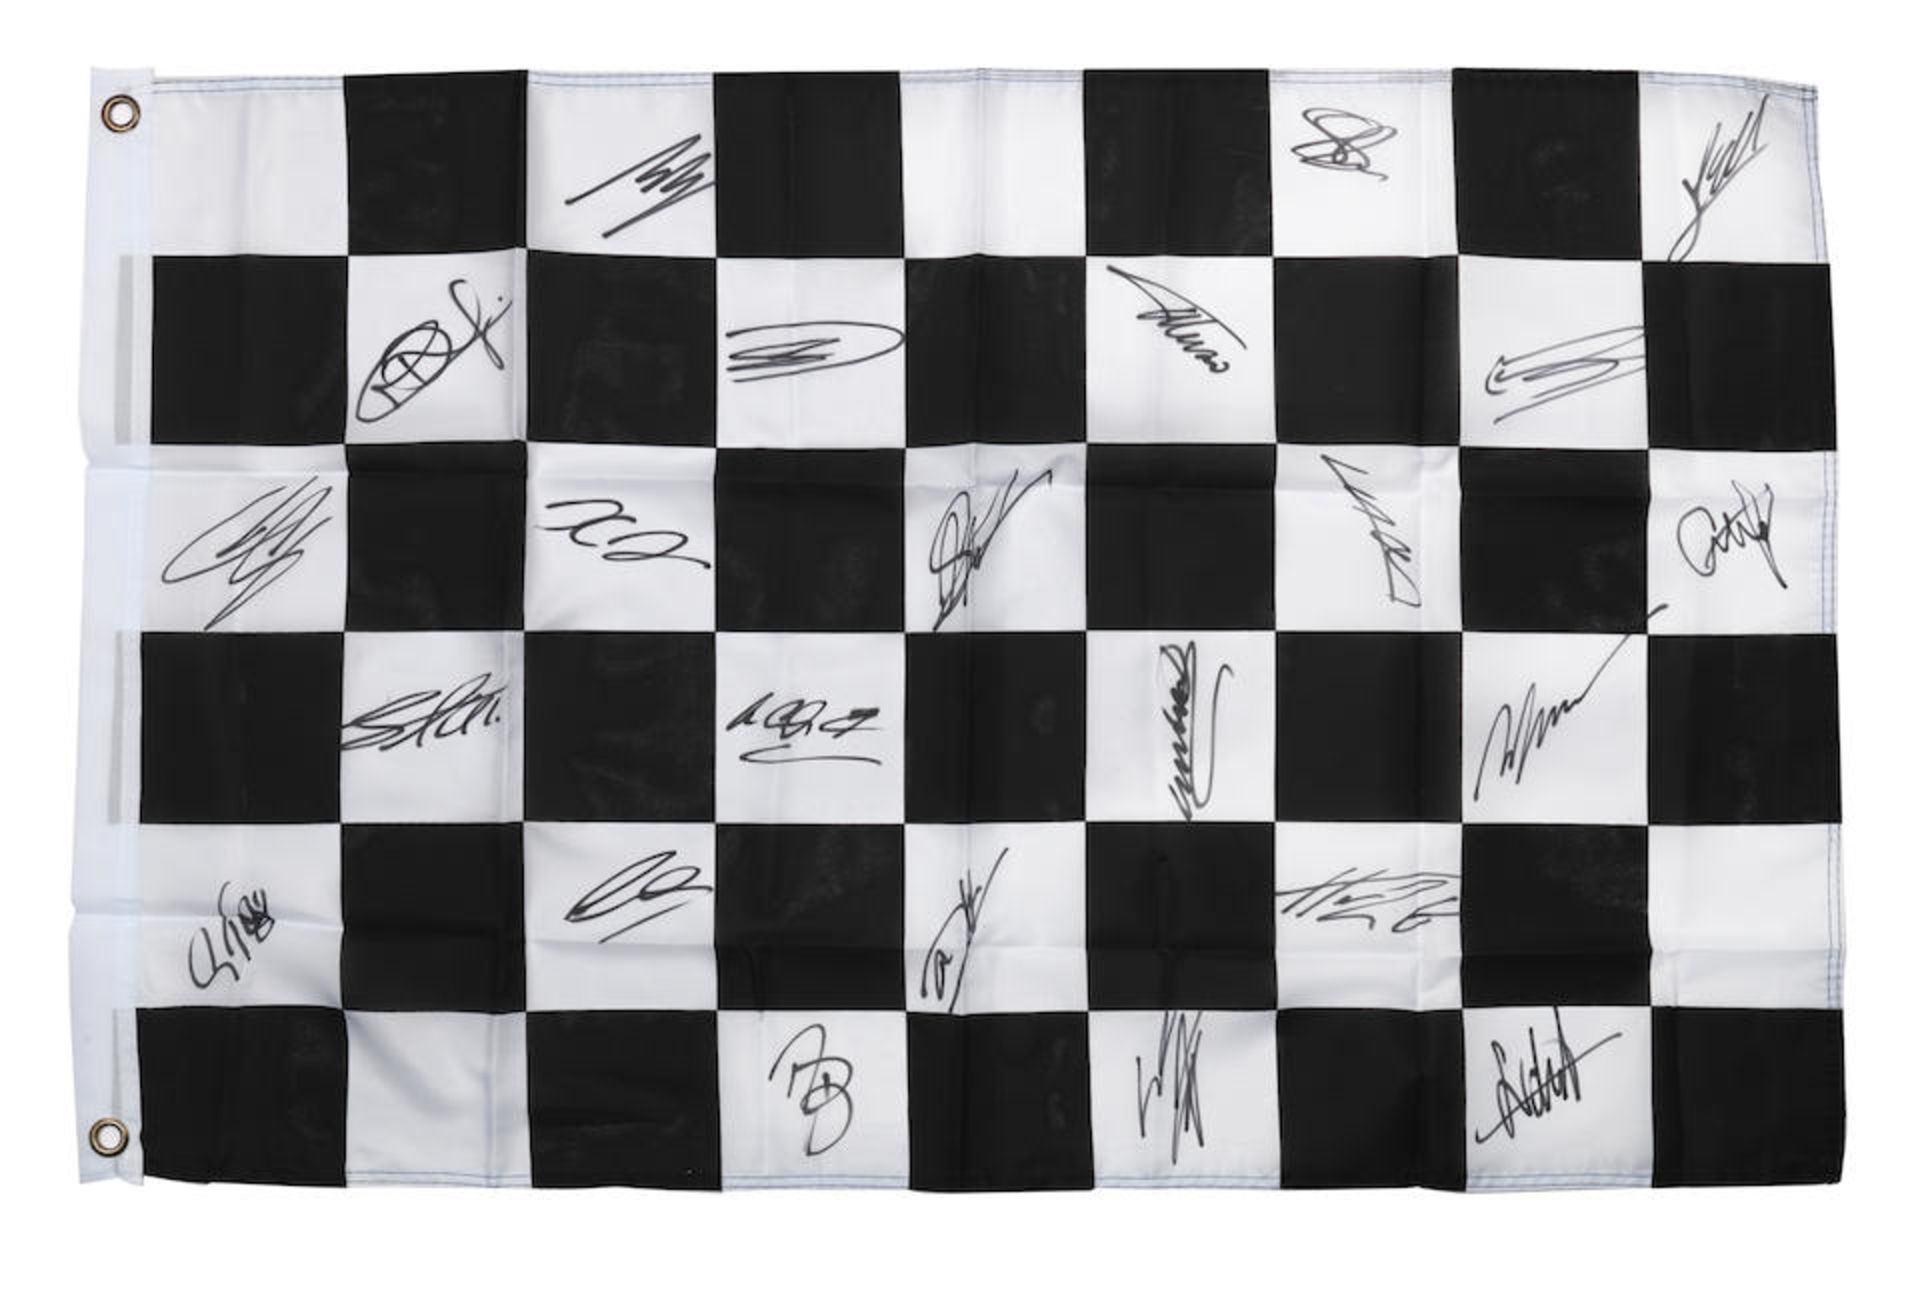 A chequered flag signed by 23 drivers from the 2007 F1 season,